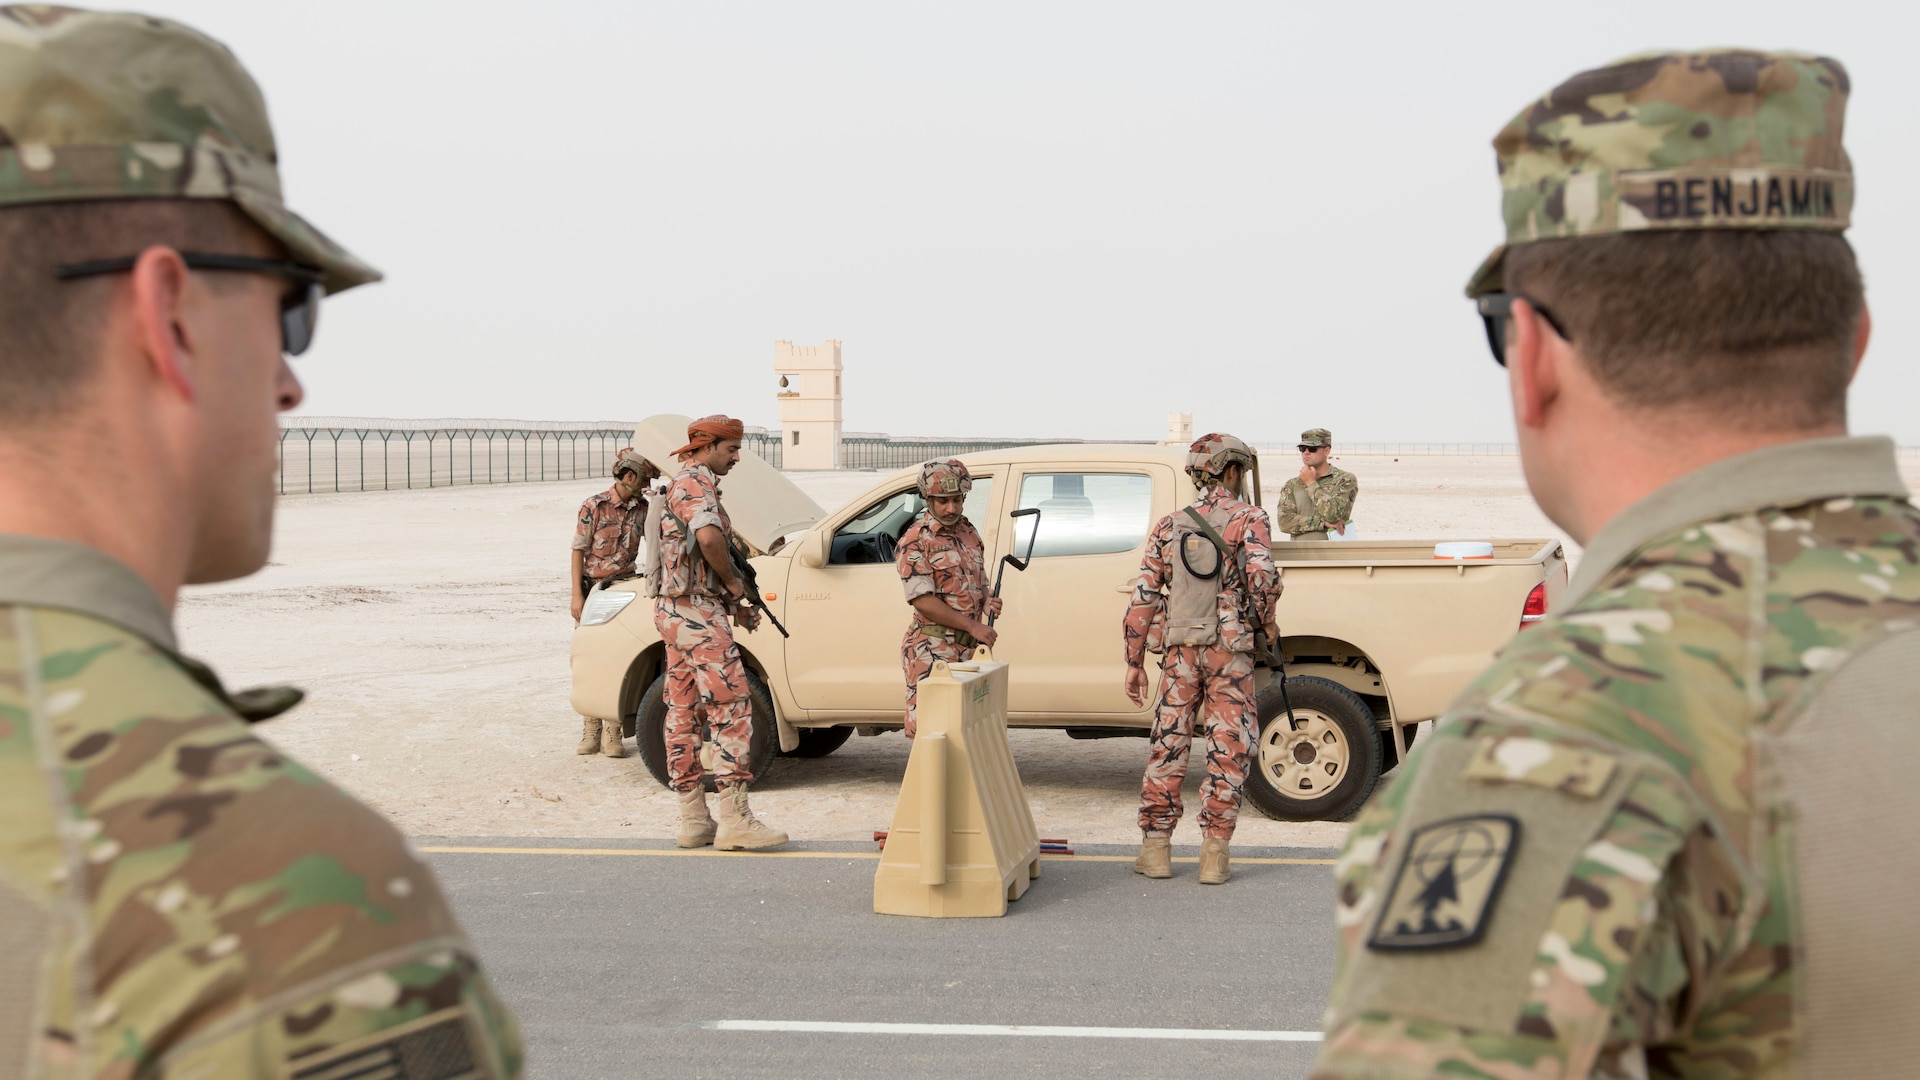 U.S. Army Soldiers with the 157th Military Engagement Team, Wisconsin Army National Guard, attached to U.S. Army Central, observe soldiers from the Royal Army of Oman's Border Guard Brigade performing a vehicle search as part of a practical exercise in which soldiers from each country demonstrated their preferred method of operating a vehicle control point in Haima, Oman, Aug. 8, 2018. The collaborative exercise increased interoperability between the U.S. Army and Omani Army by creating an opportunity for soldiers from each country to share best practices in border security. (U.S. Army photo by Spc. Adam Parent)